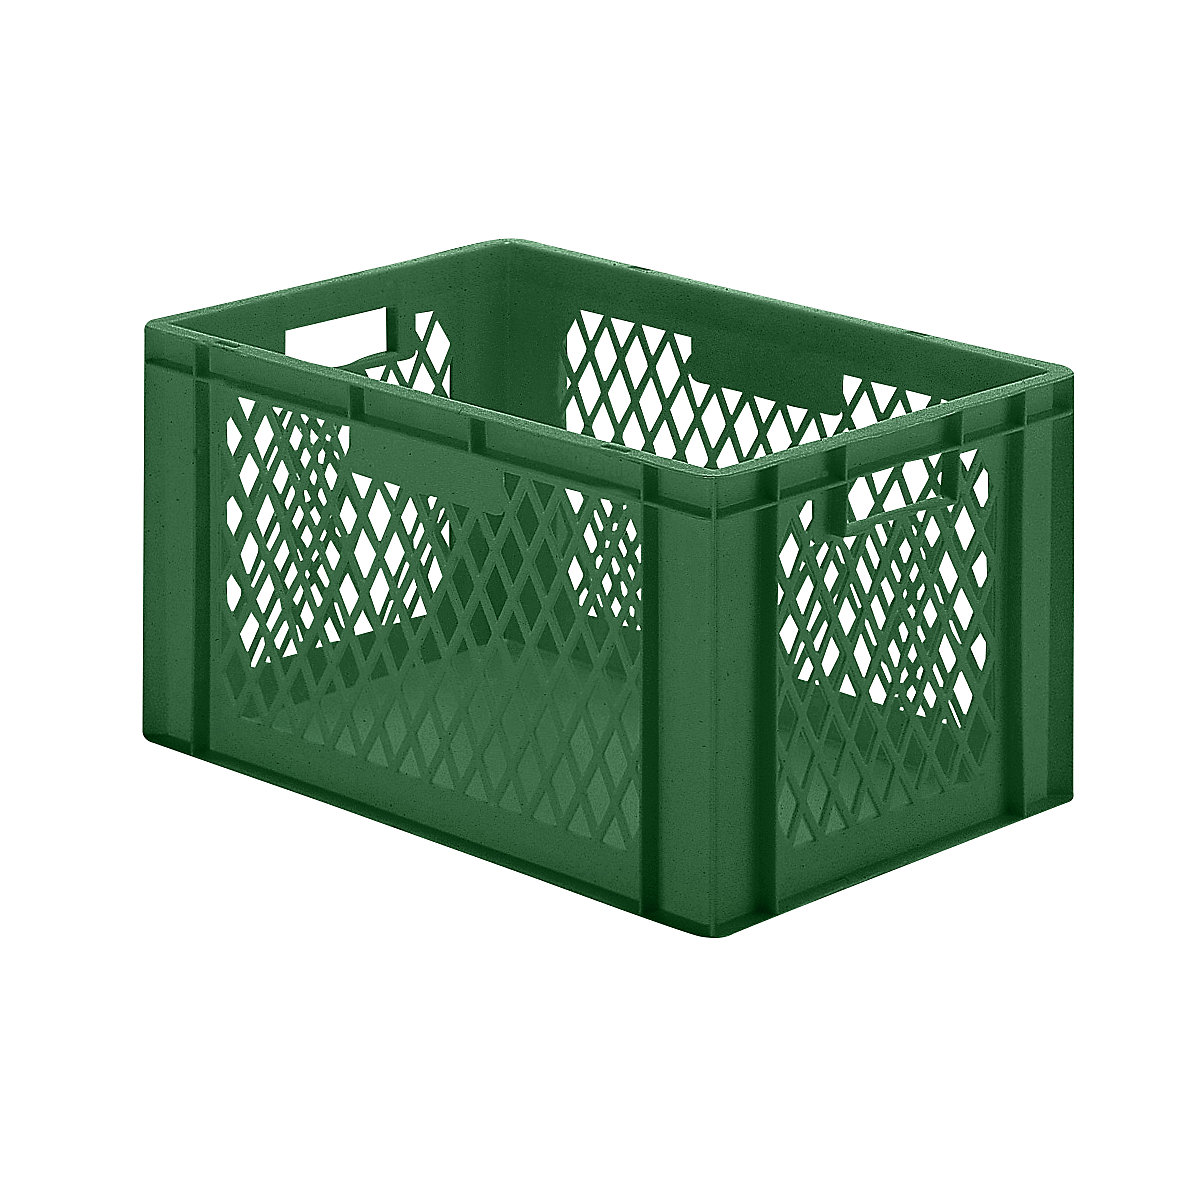 Euro stacking container, perforated walls, closed base, LxWxH 600 x 400 x 320 mm, green, pack of 5